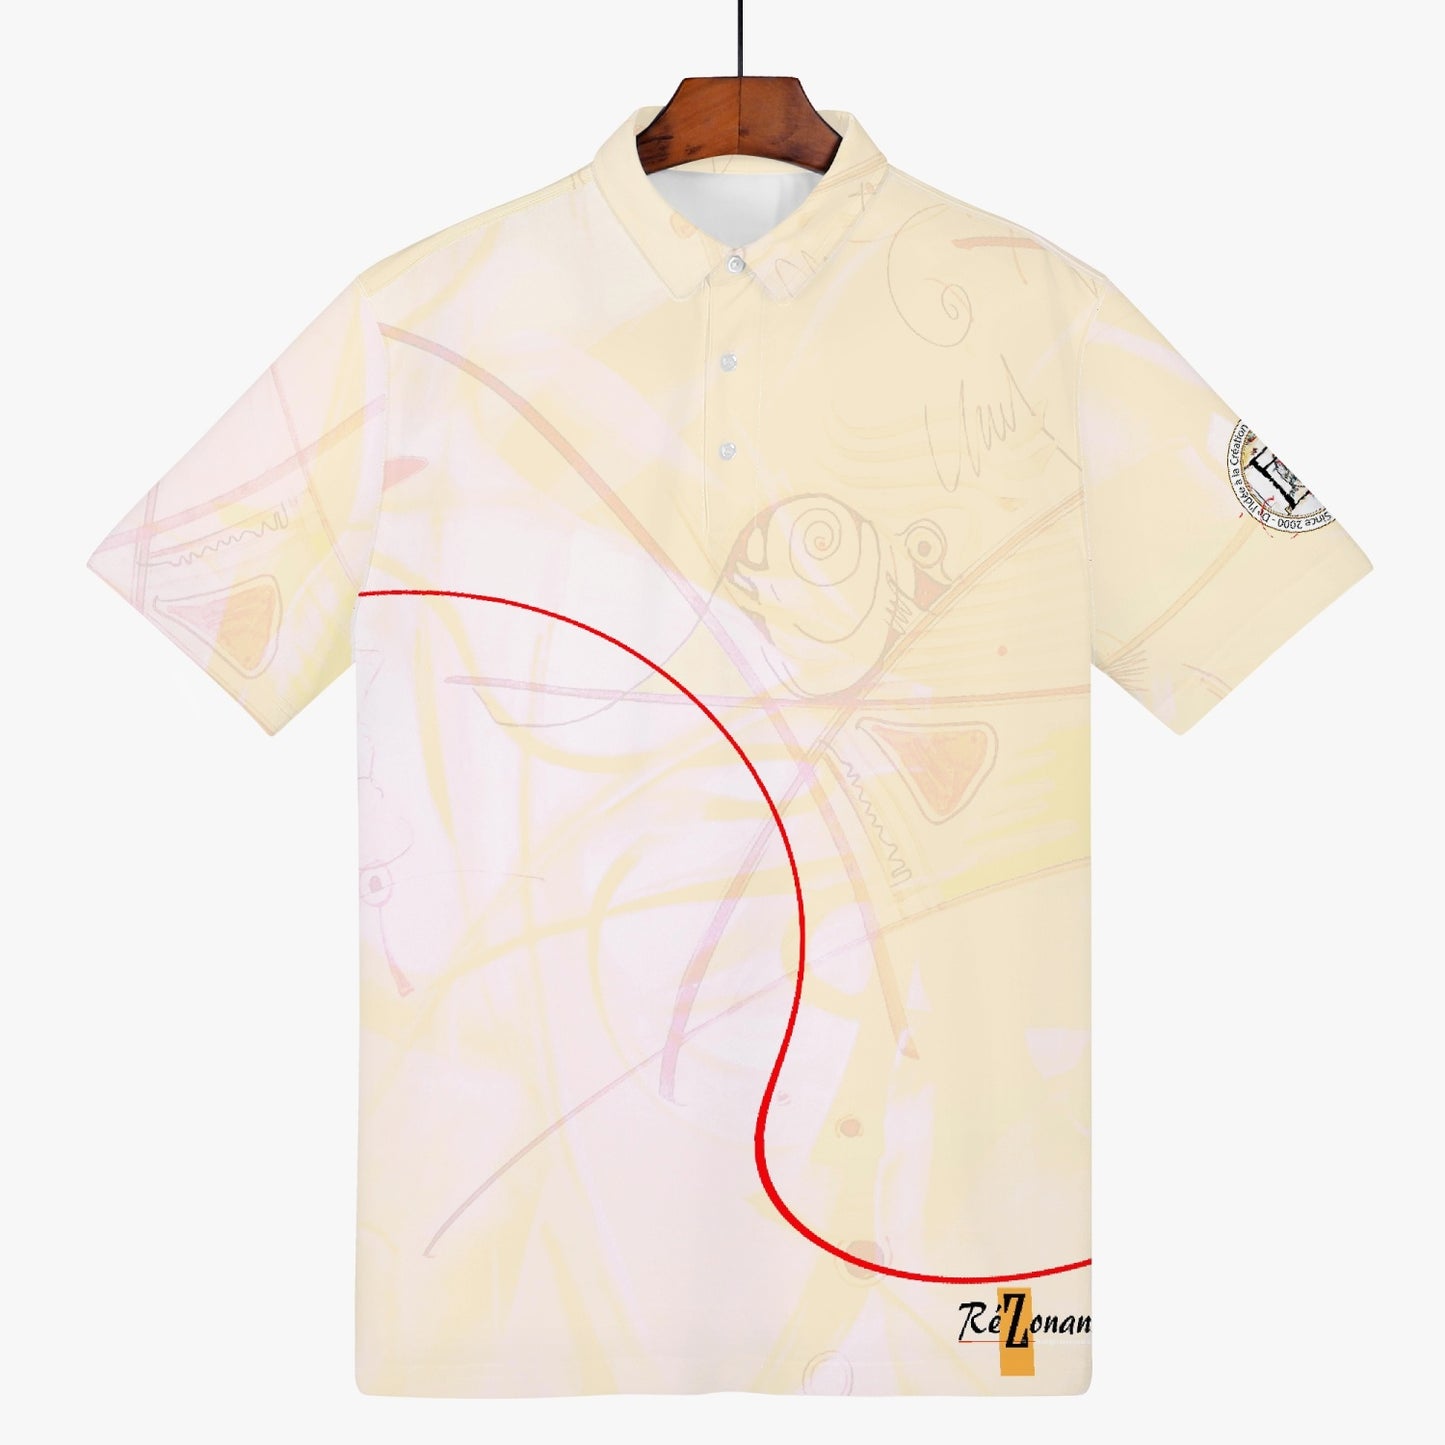 All-over "Marquerouge" polo shirt